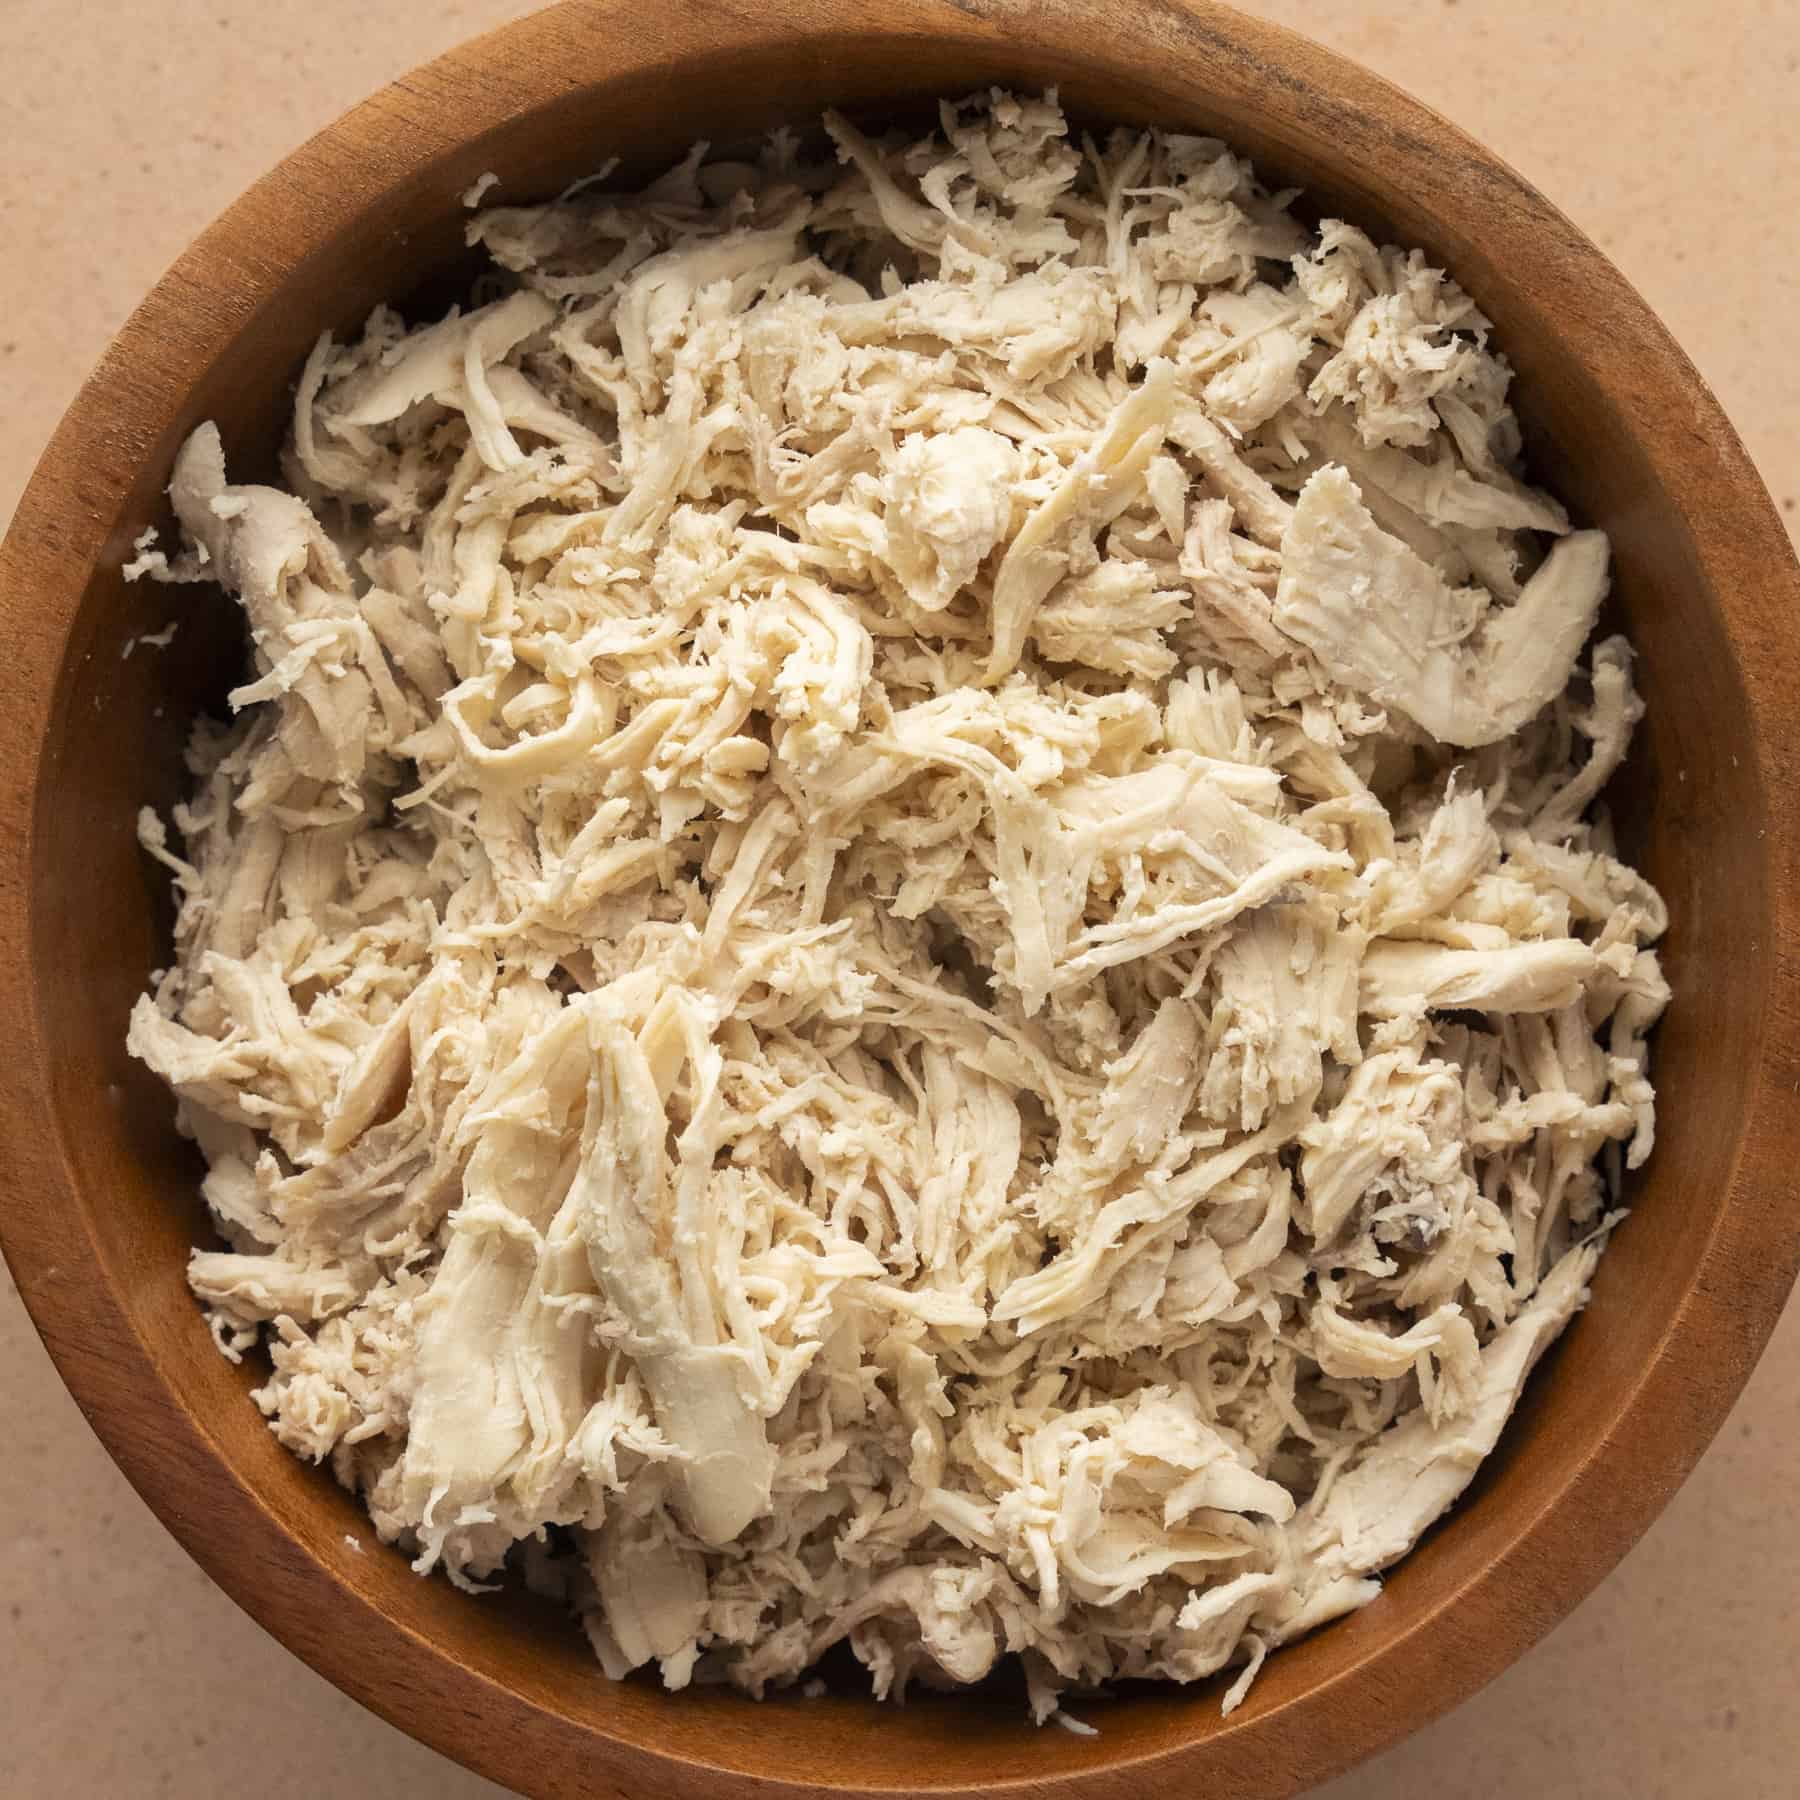 The BEST Way to Meal Prep Shredded Chicken Breast